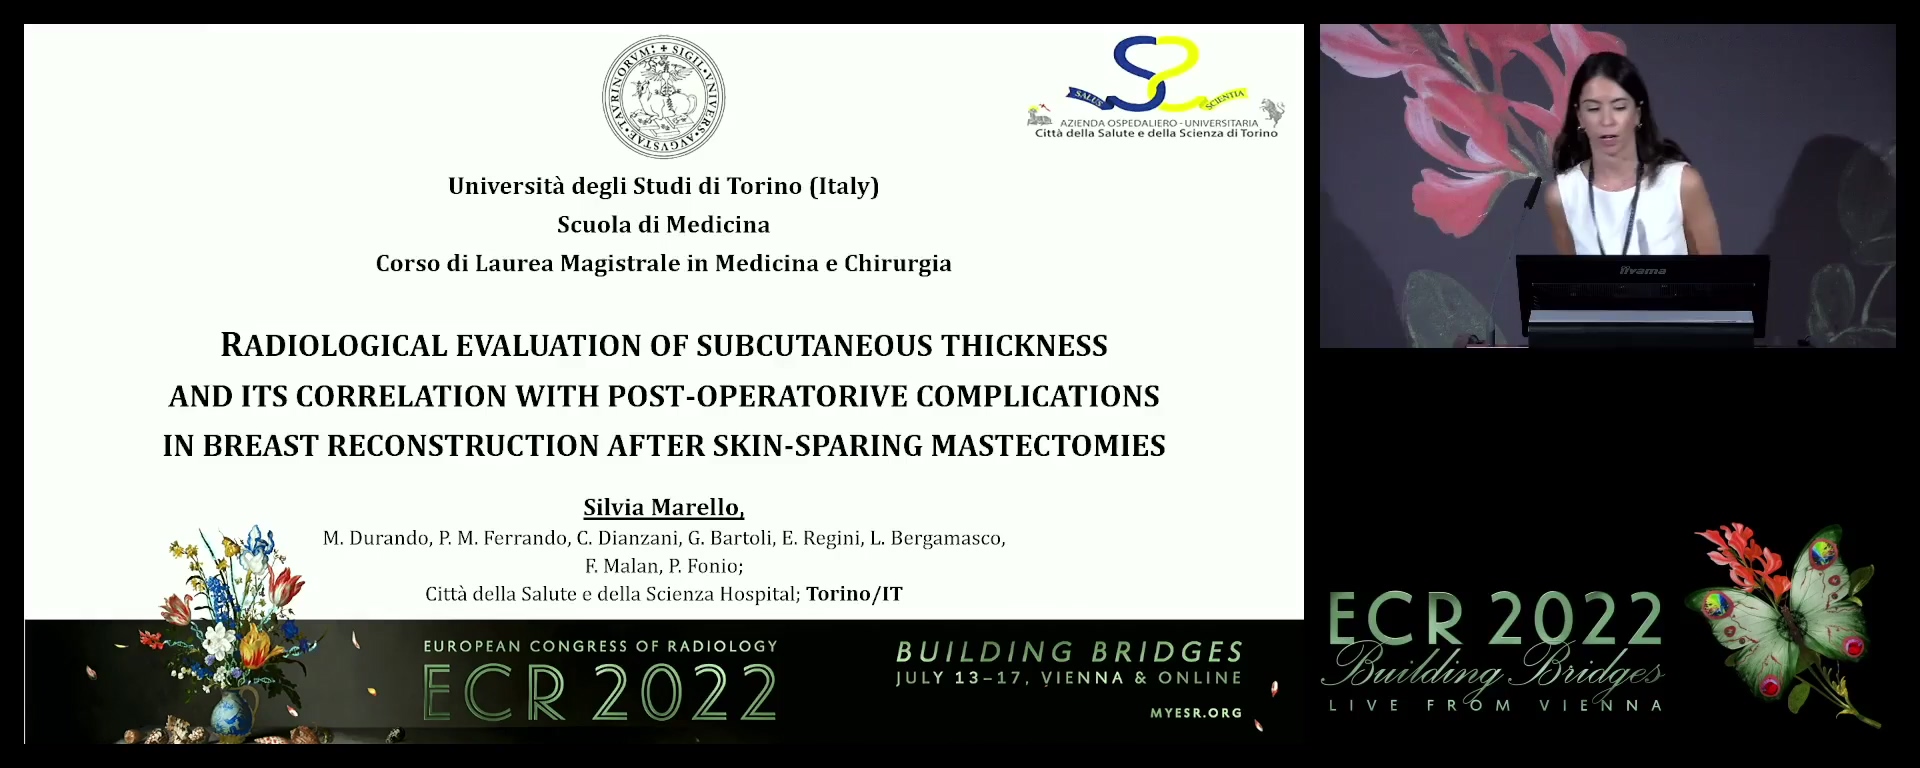 Radiological evaluation of breast subcutaneous tissue thickness and correlation with postoperative complications in breast reconstruction after tissue-sparing mastectomies. - Silvia Marello, Torino / IT